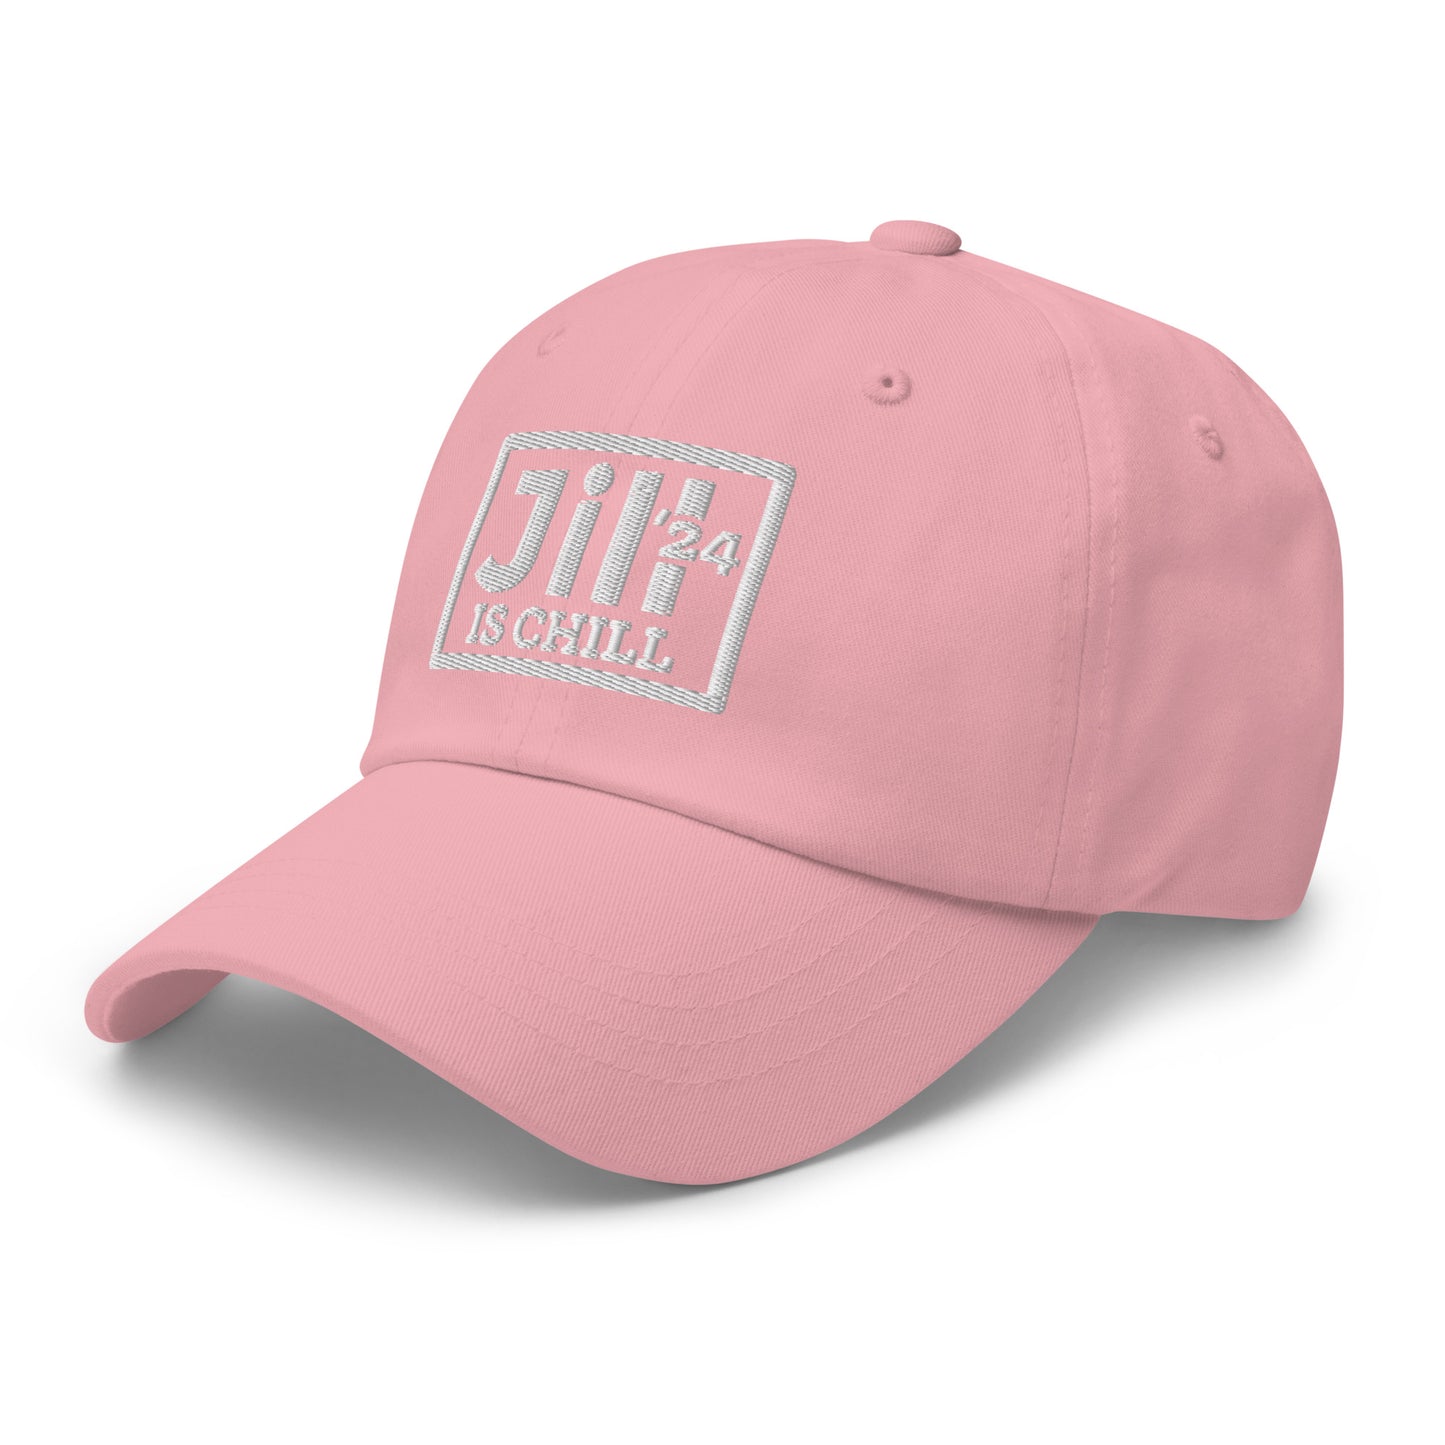 Jill is Chill Embroidered Organic Dad Hat